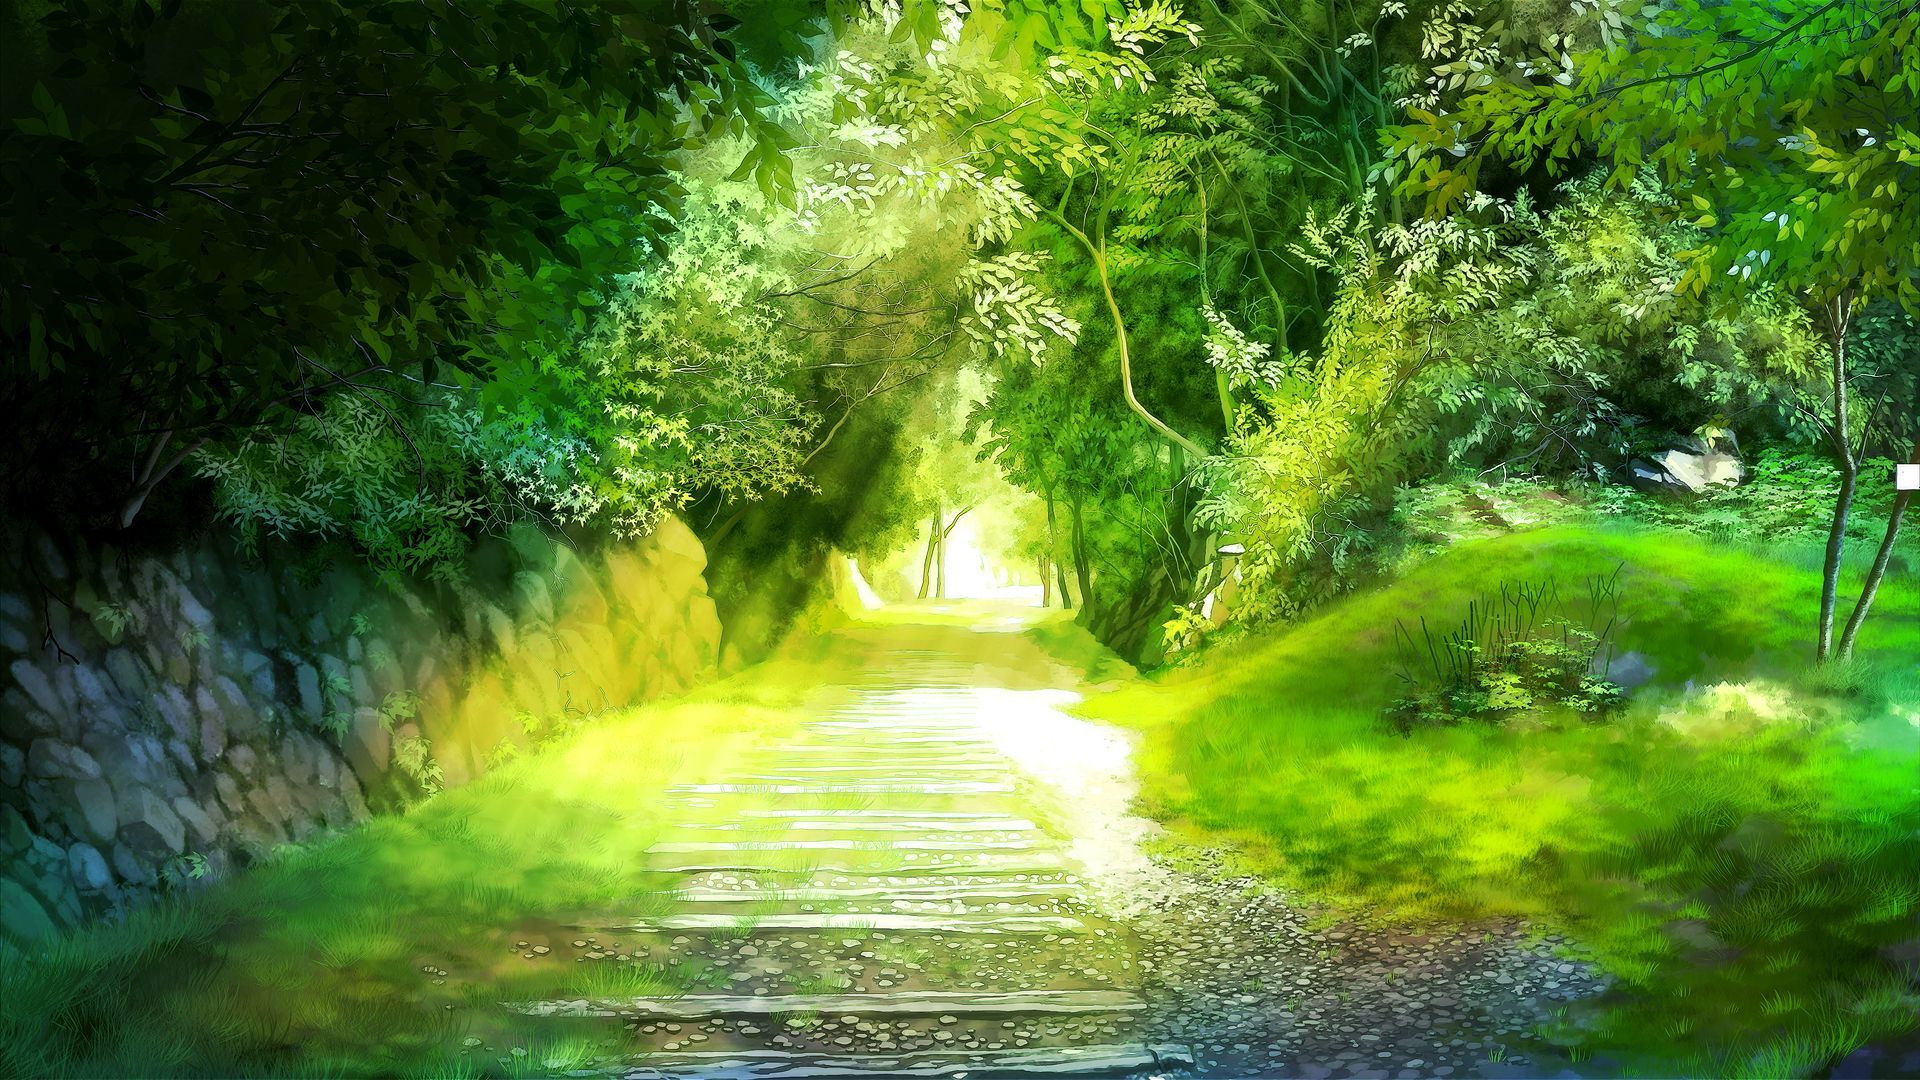 Nature Anime Scenery Background Wallpaper Resources: Wallpaper